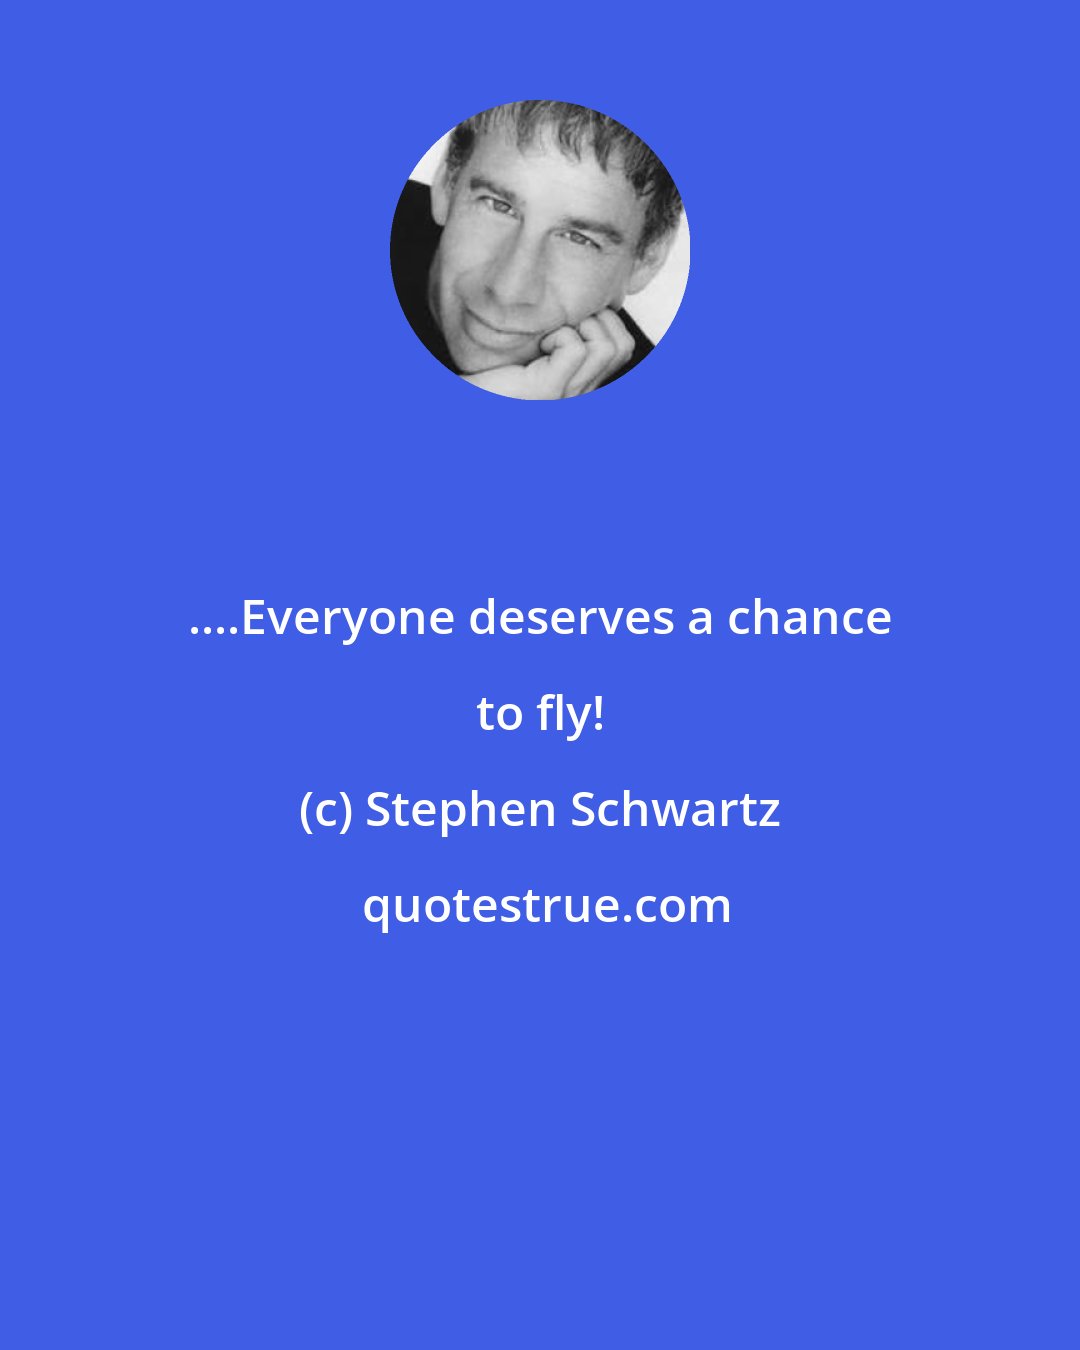 Stephen Schwartz: ....Everyone deserves a chance to fly!